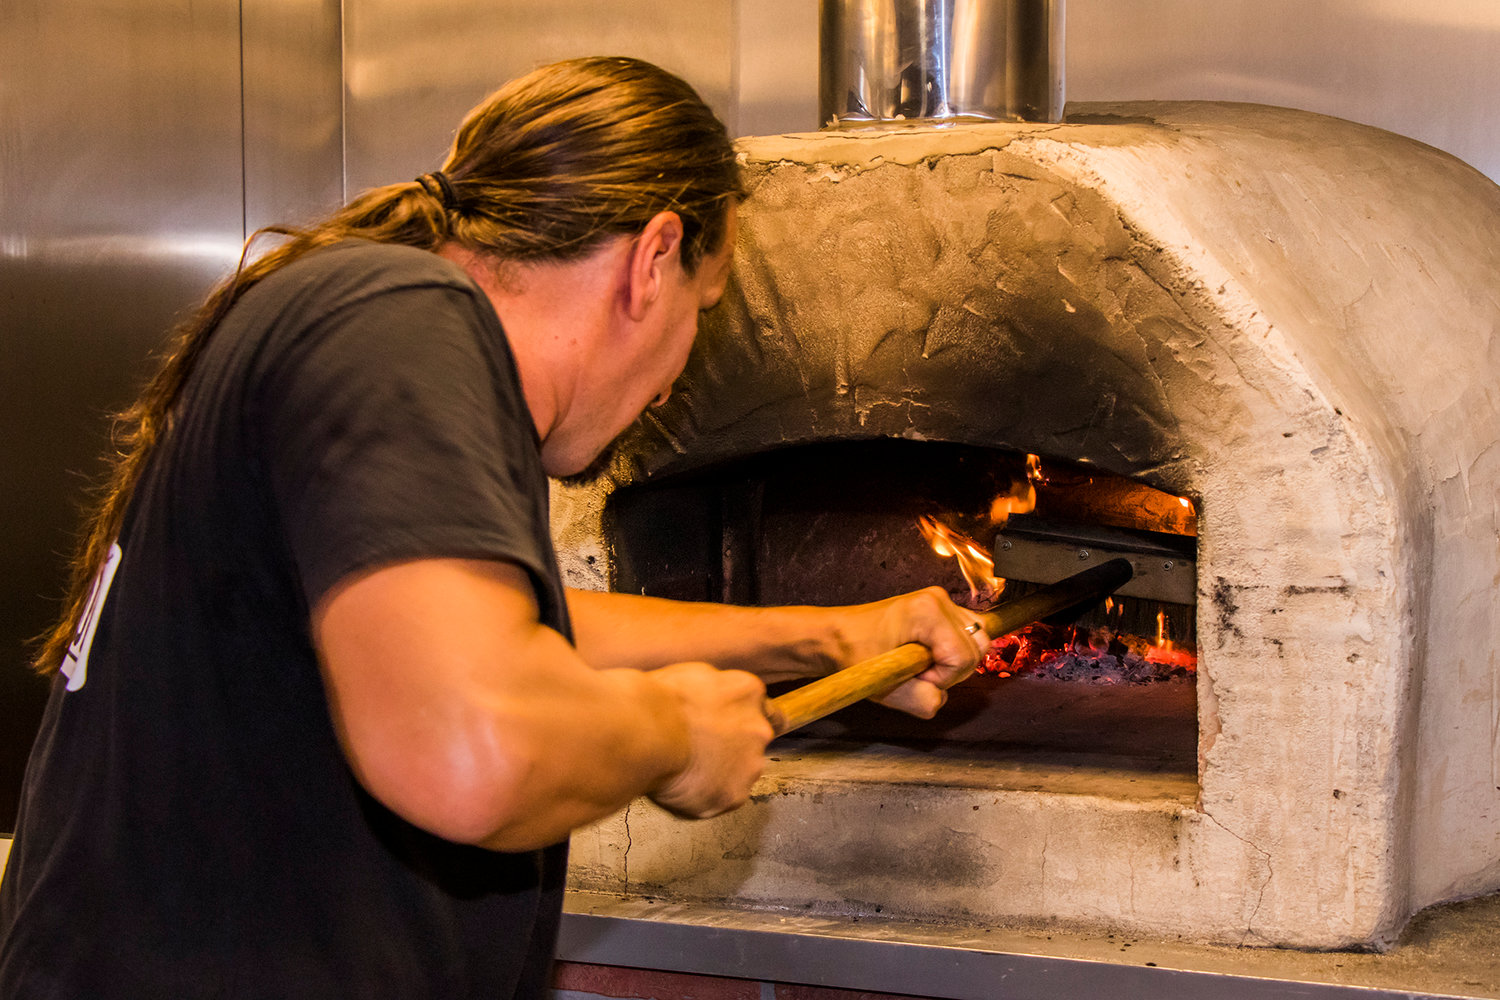 Brent Yerton sweeps the floor of the oven inside the Milltown Pizza food cart Tuesday afternoon in Chehalis.